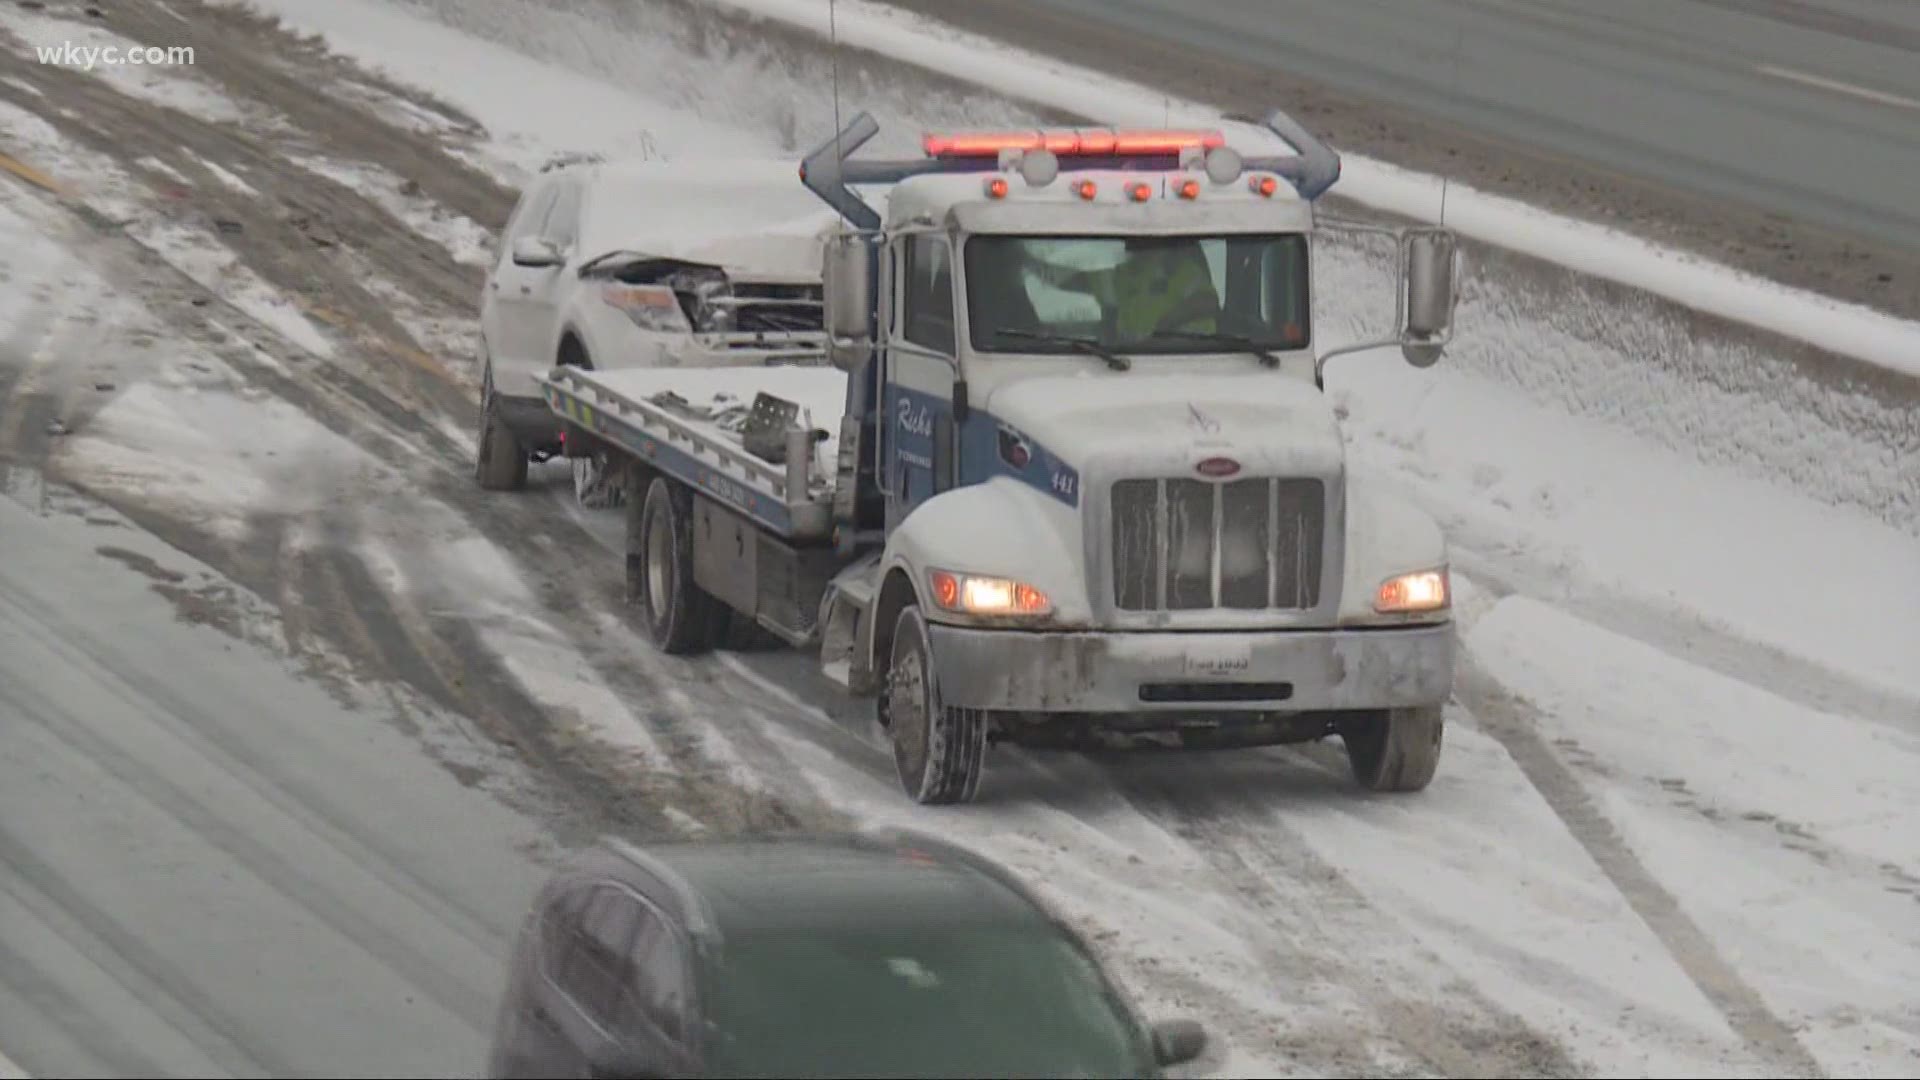 Ohioans are no stranger to snow. But winter snow combined with driving can catch even the most experienced drivers off guard. Laura Caso reports